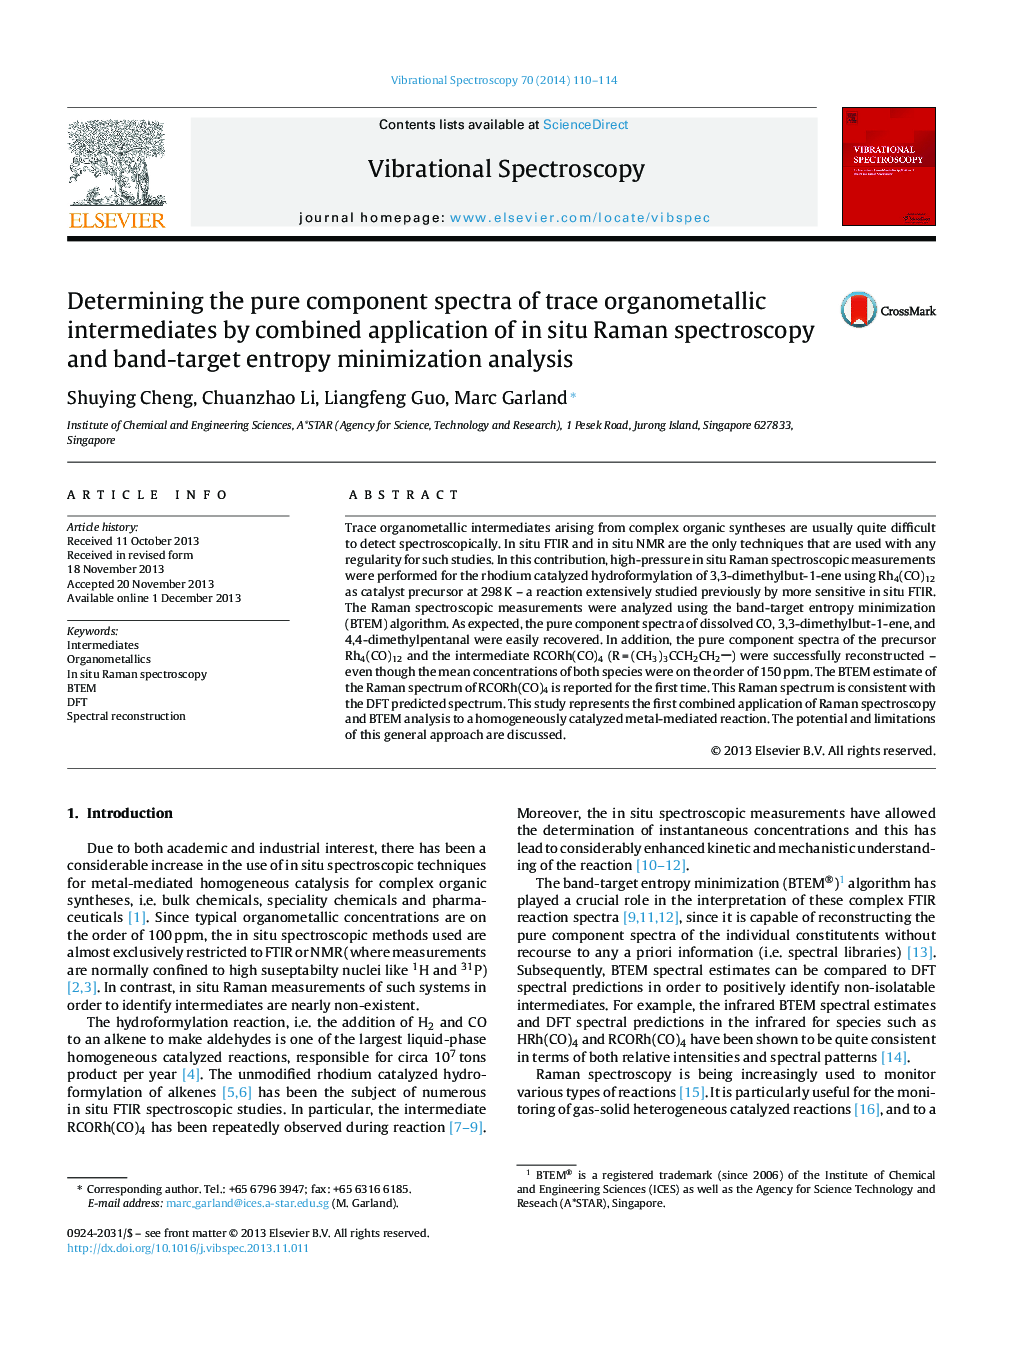 Determining the pure component spectra of trace organometallic intermediates by combined application of in situ Raman spectroscopy and band-target entropy minimization analysis